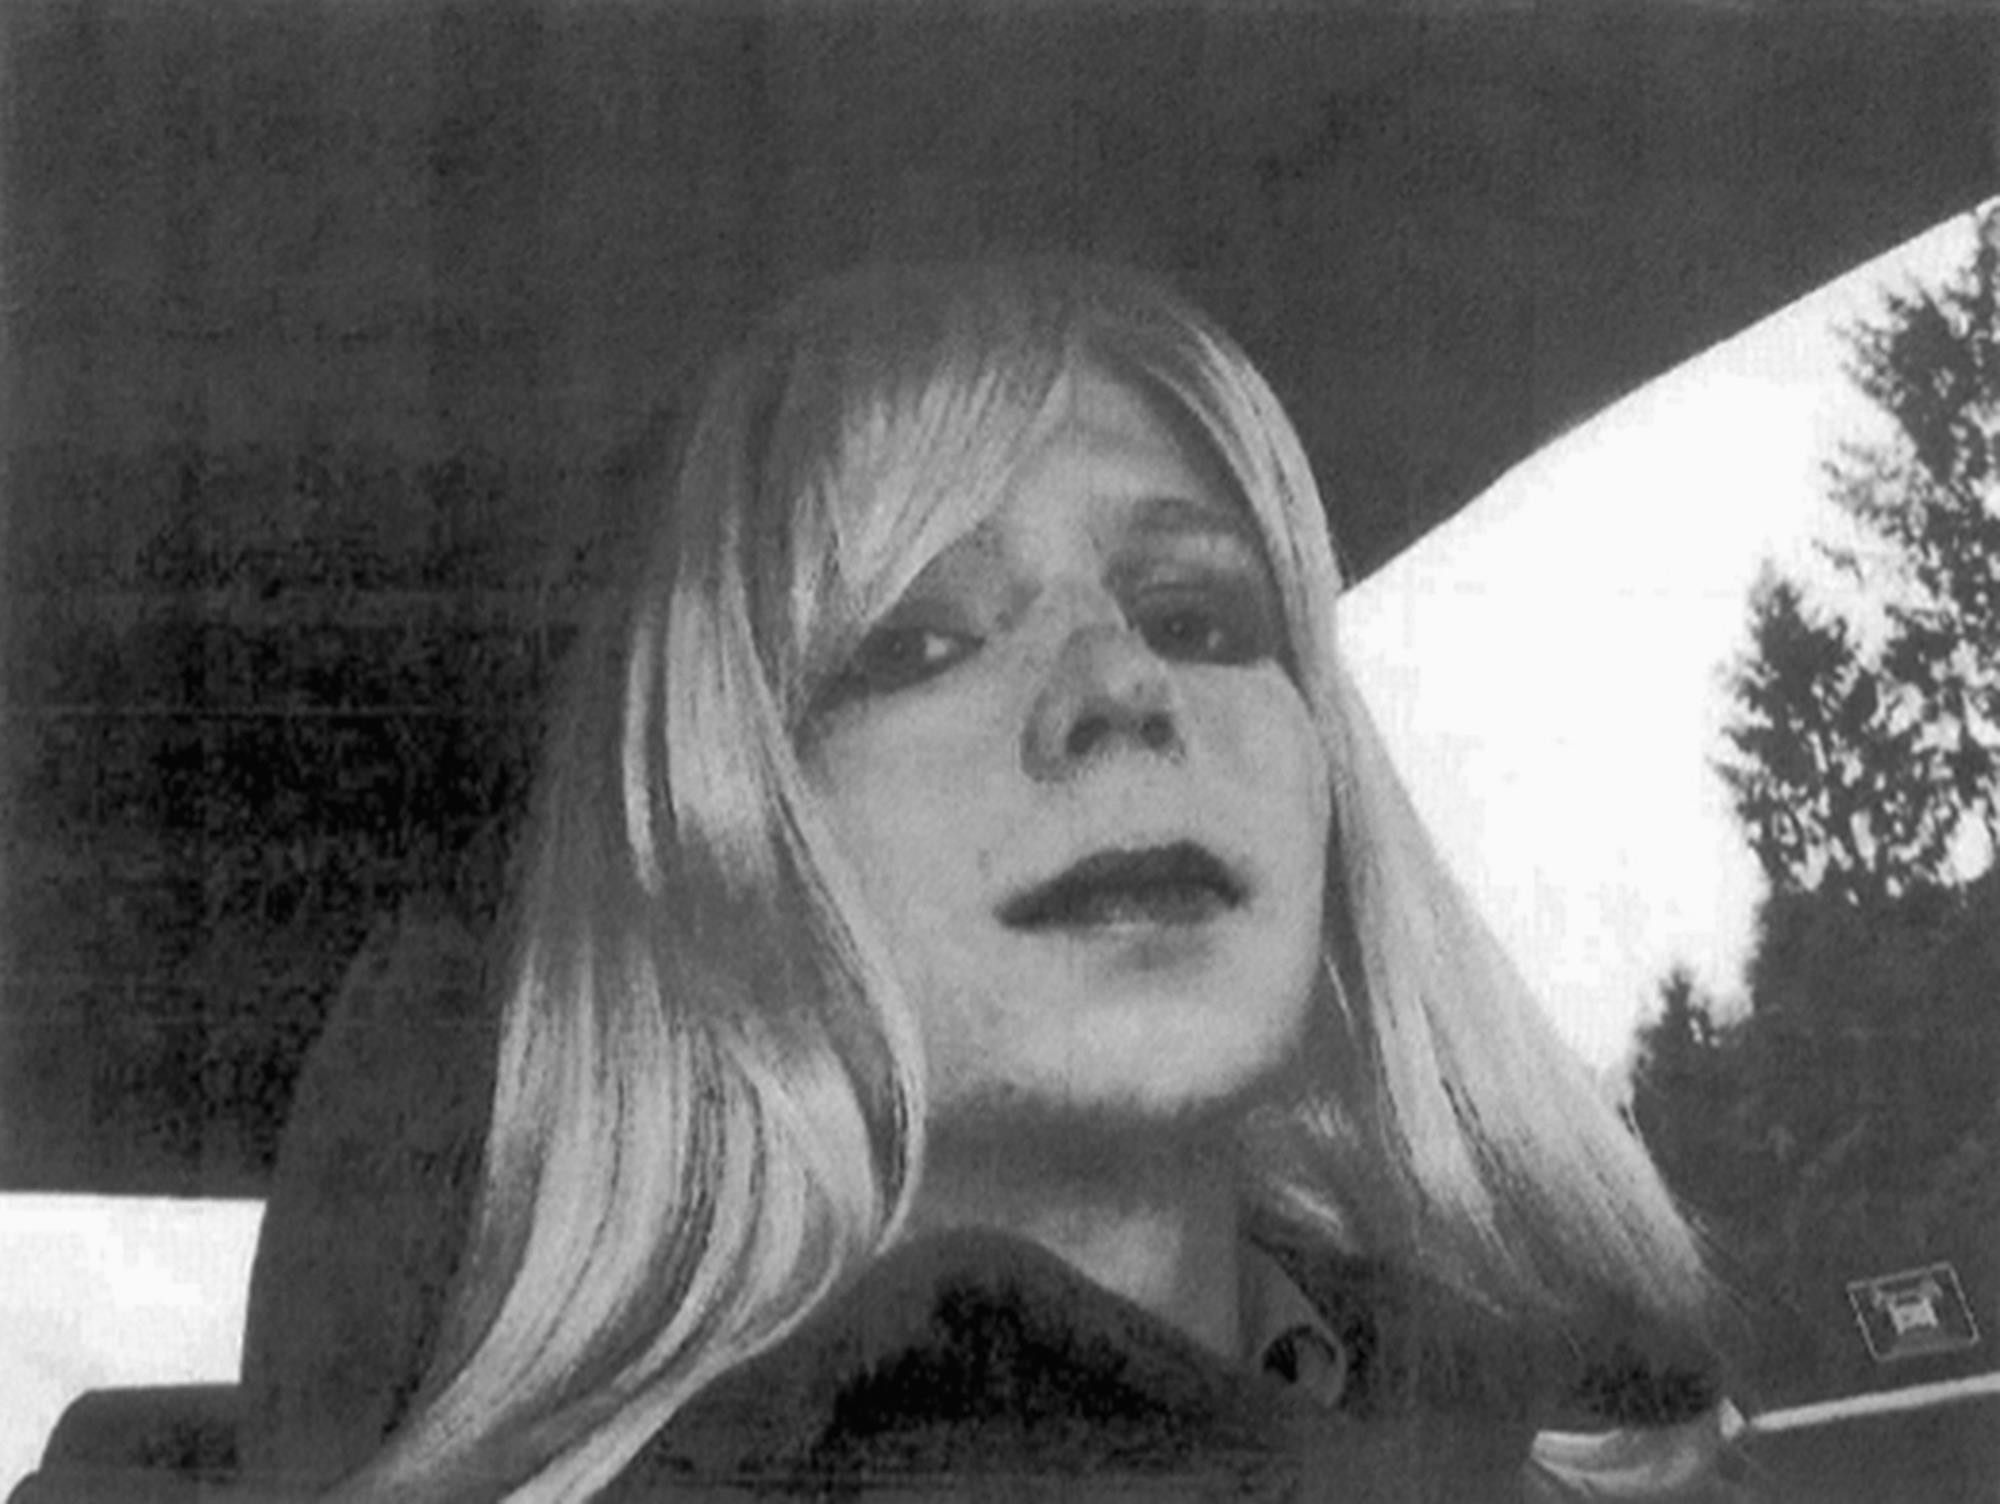 In  this undated file photo provided by the U.S. Army, Pfc. Chelsea Manning poses for a photo wearing a wig and lipstick. (AP Photo)